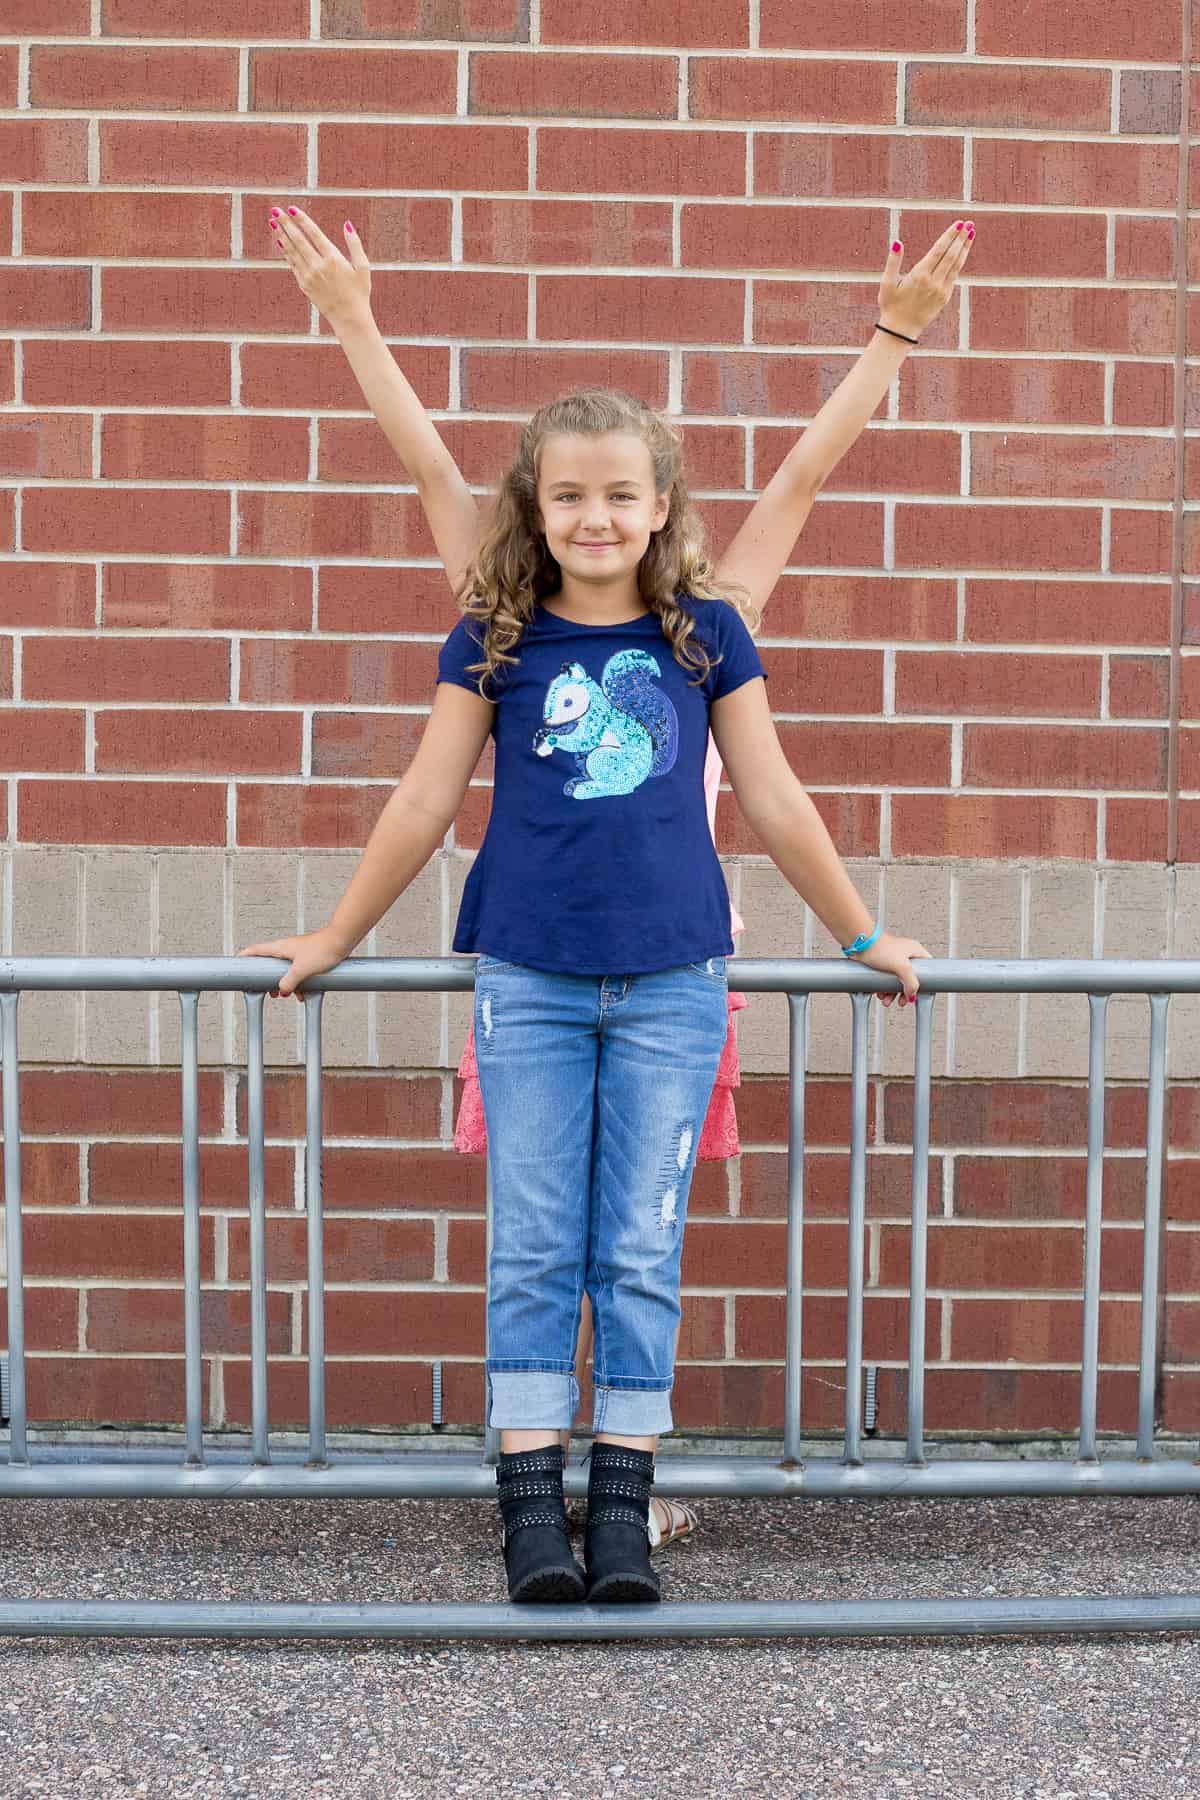 Raising Strong Girls: Got middle school jitters? Help your tween overcome first day panic with these tips. Here’s what parents need to know before the first day of middle school. *Great back-to-school resource.